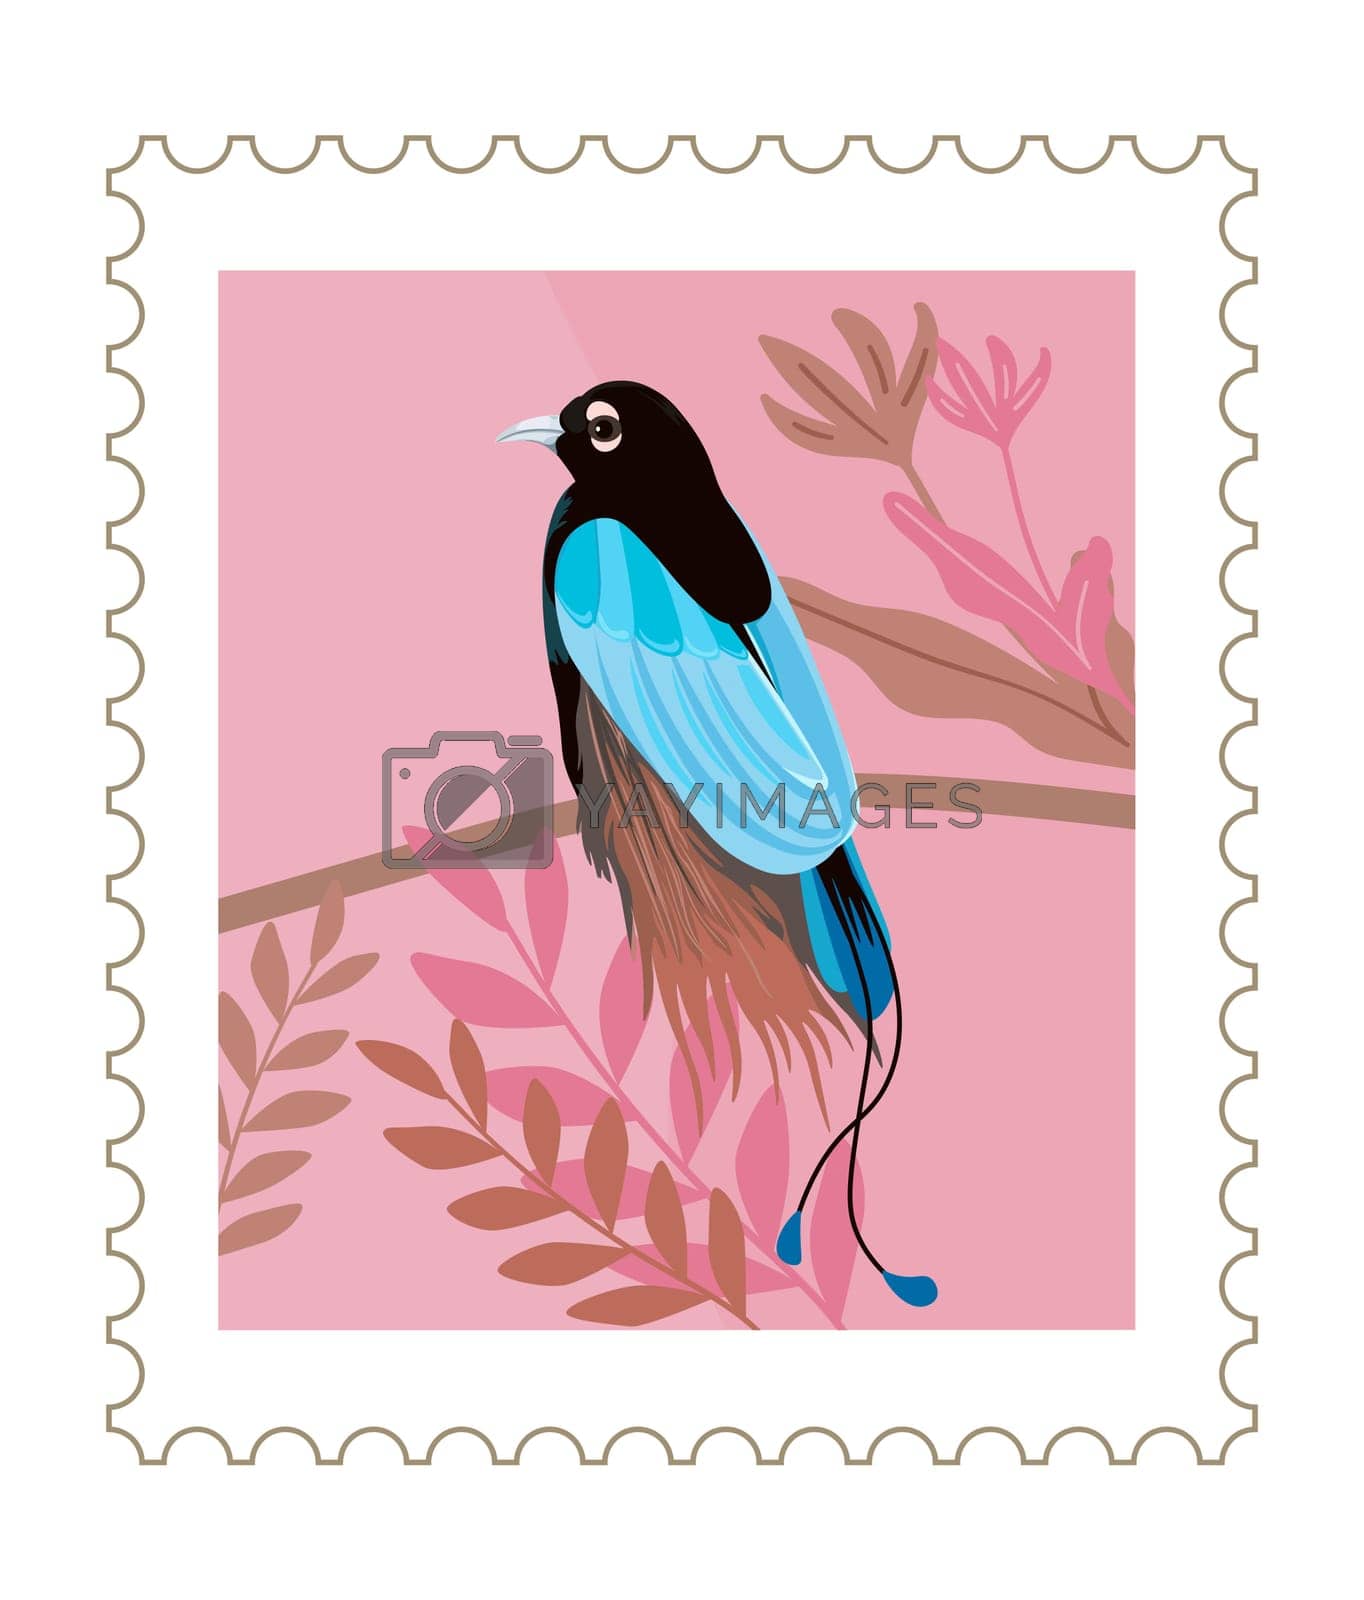 Royalty free image of Postal card or mark with exotic bird and leaves by Sonulkaster